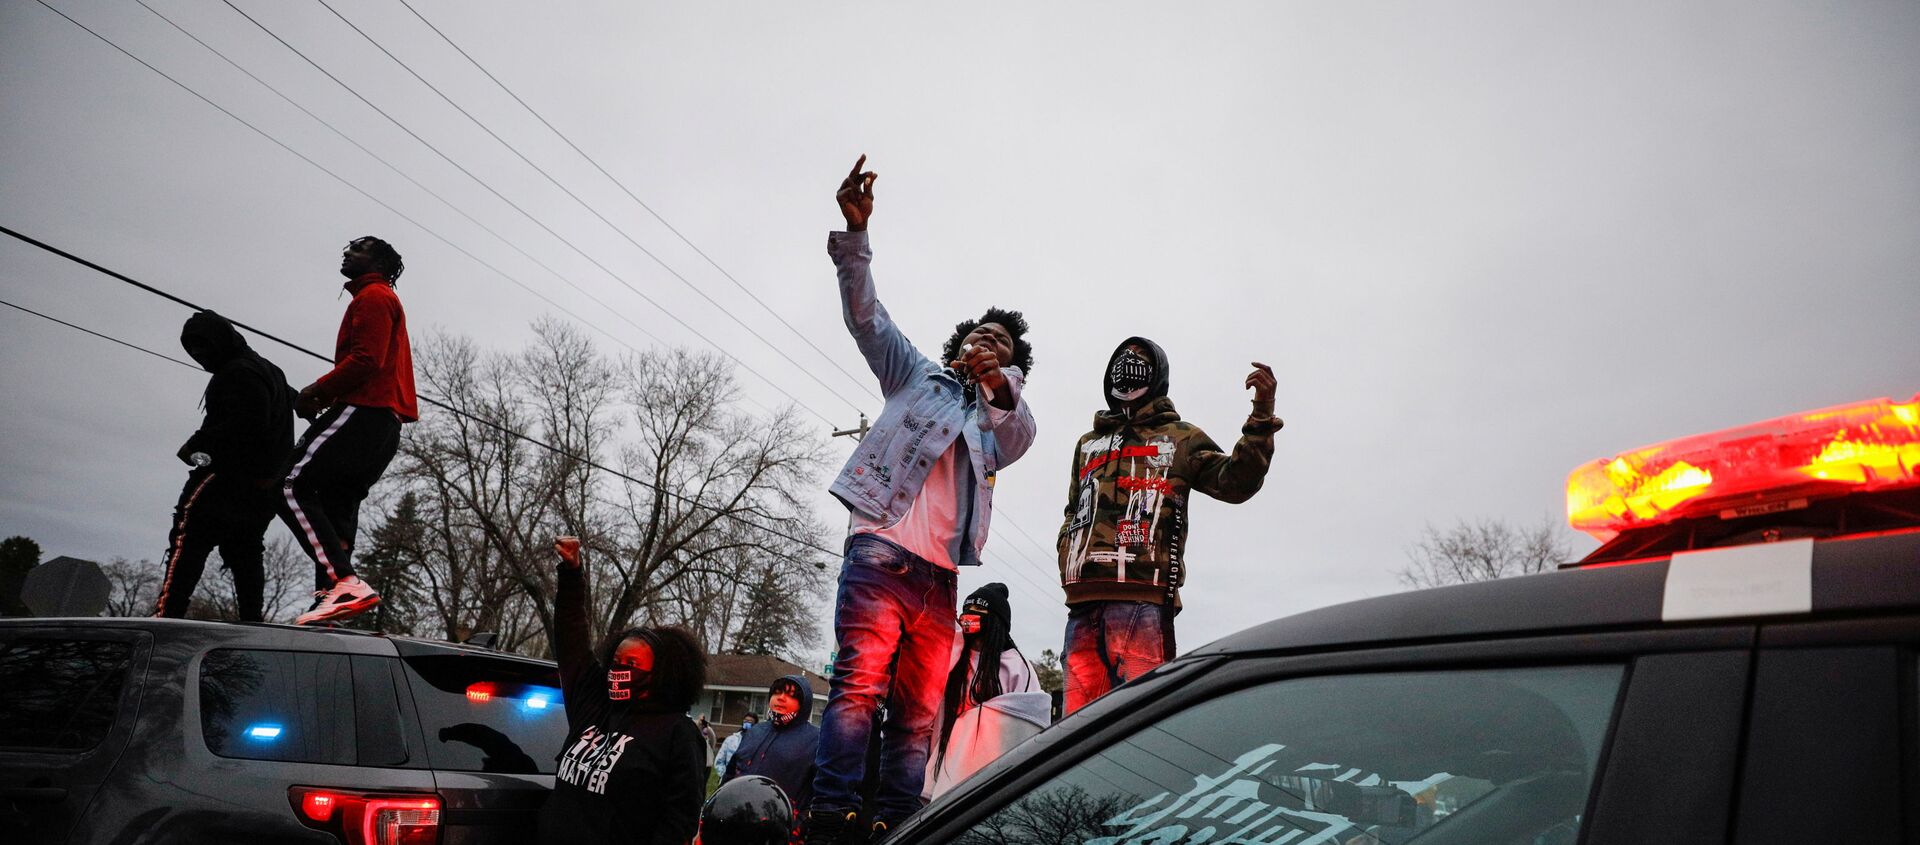 Demonstrators stand on a police vehicle during a protest after police allegedly shot and killed a man, who local media report is identified by the victim's mother as Daunte Wright, in Brooklyn Center, Minnesota, U.S. - Sputnik International, 1920, 14.04.2021